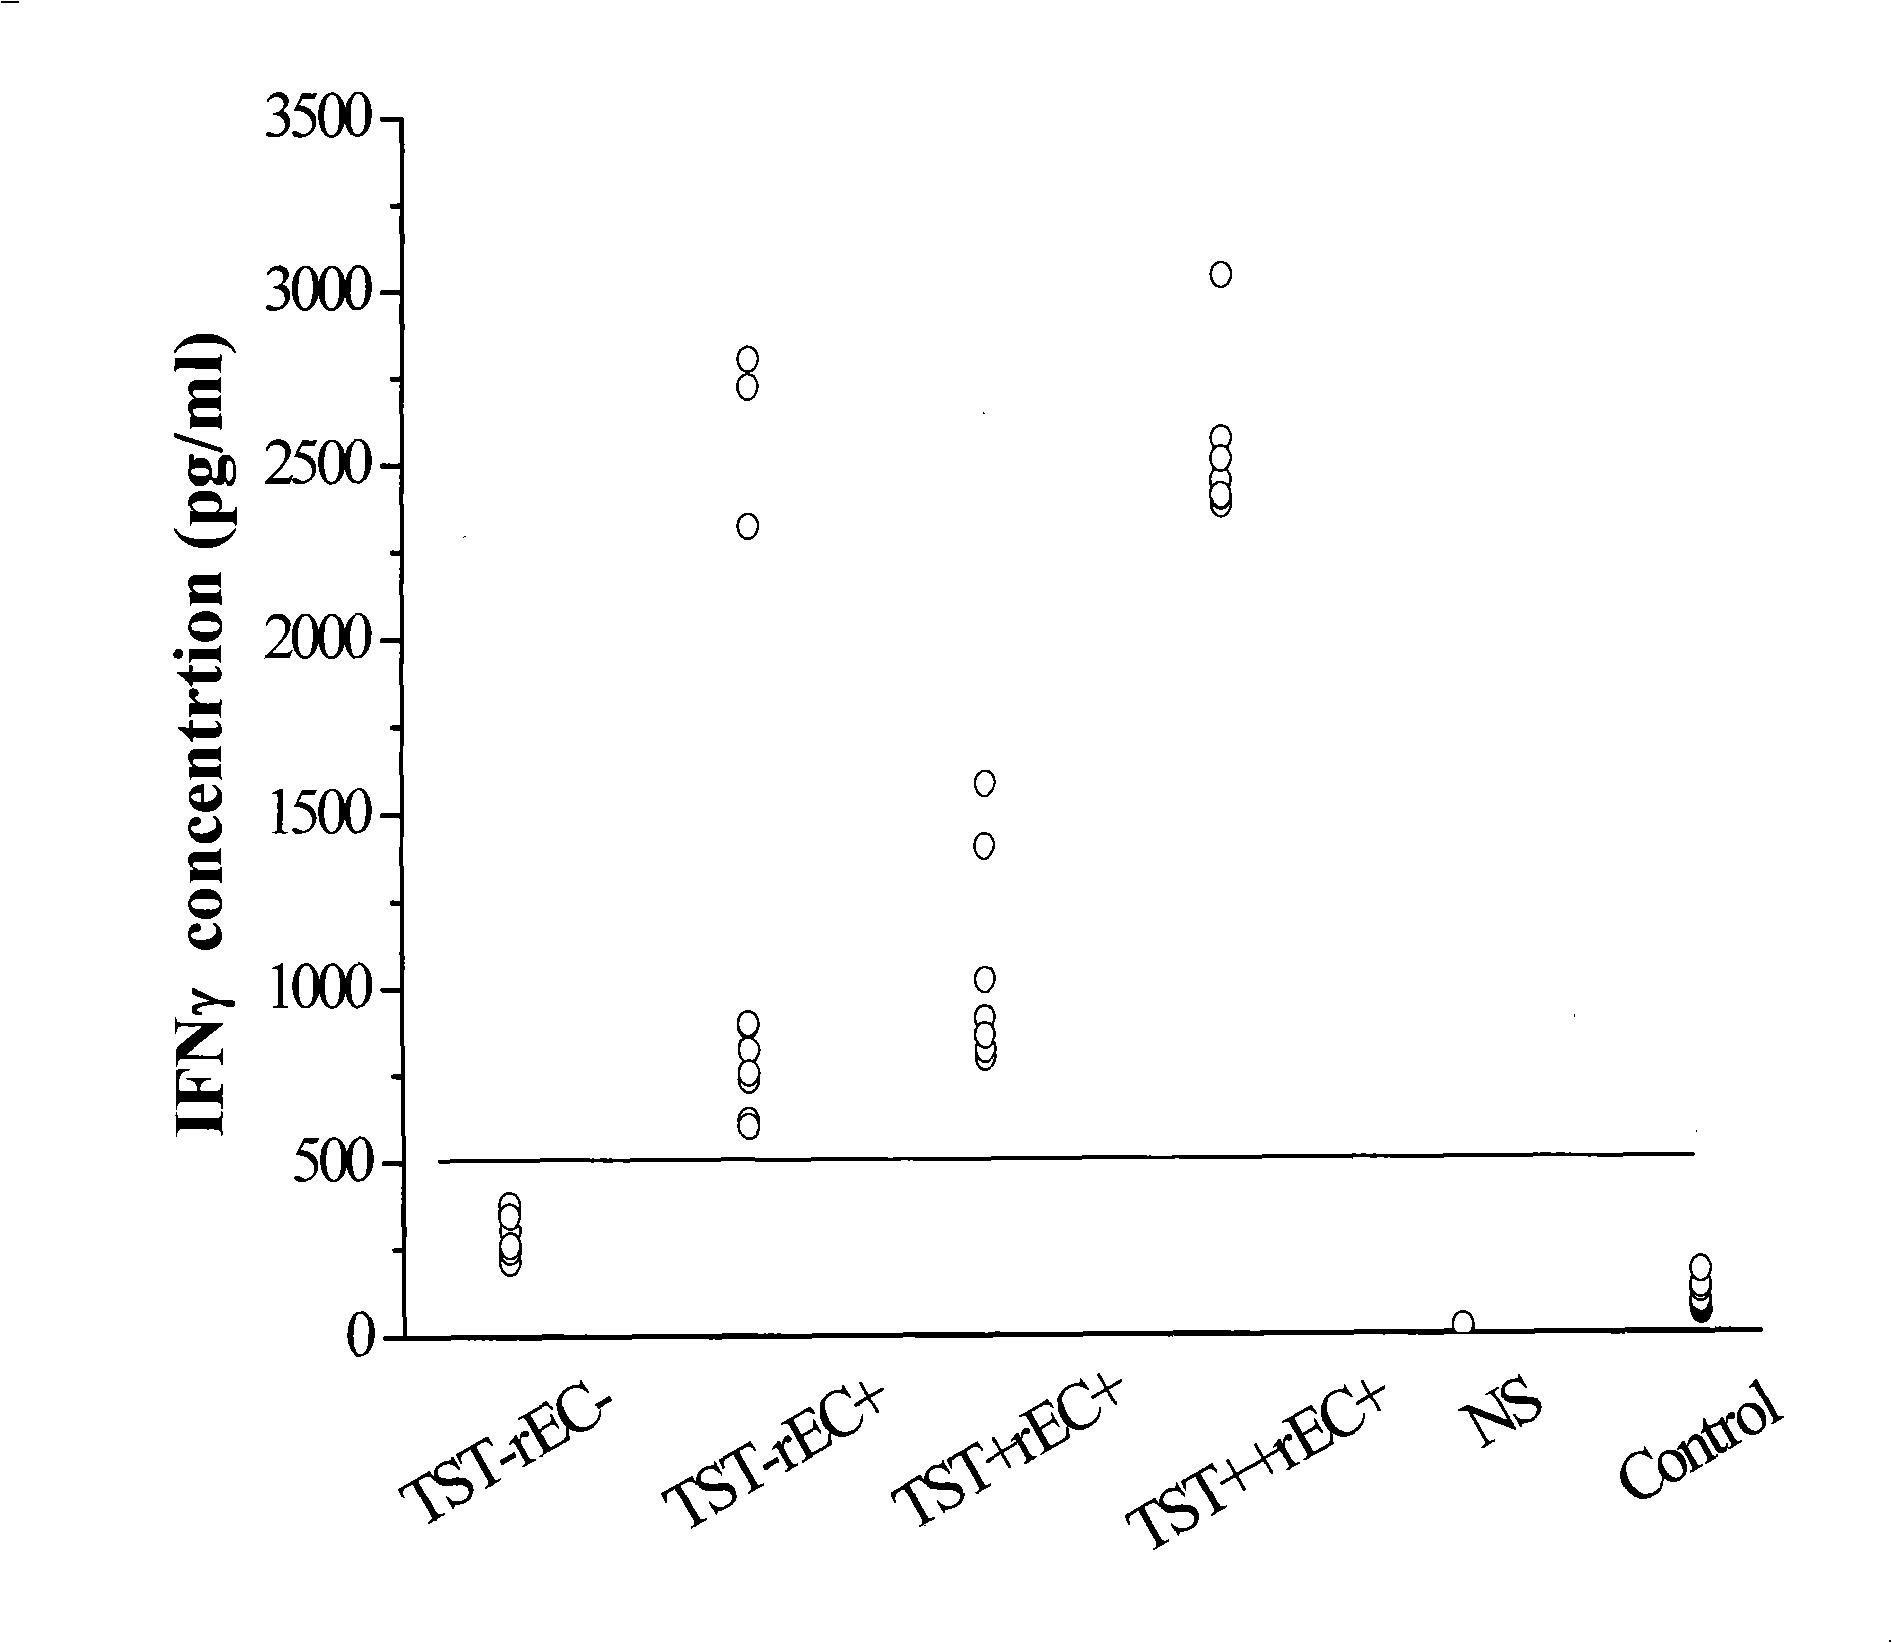 Tuberculosis antigen specific whole blood IFN-gamma diagnosis kit, method for producing the same and method for using same